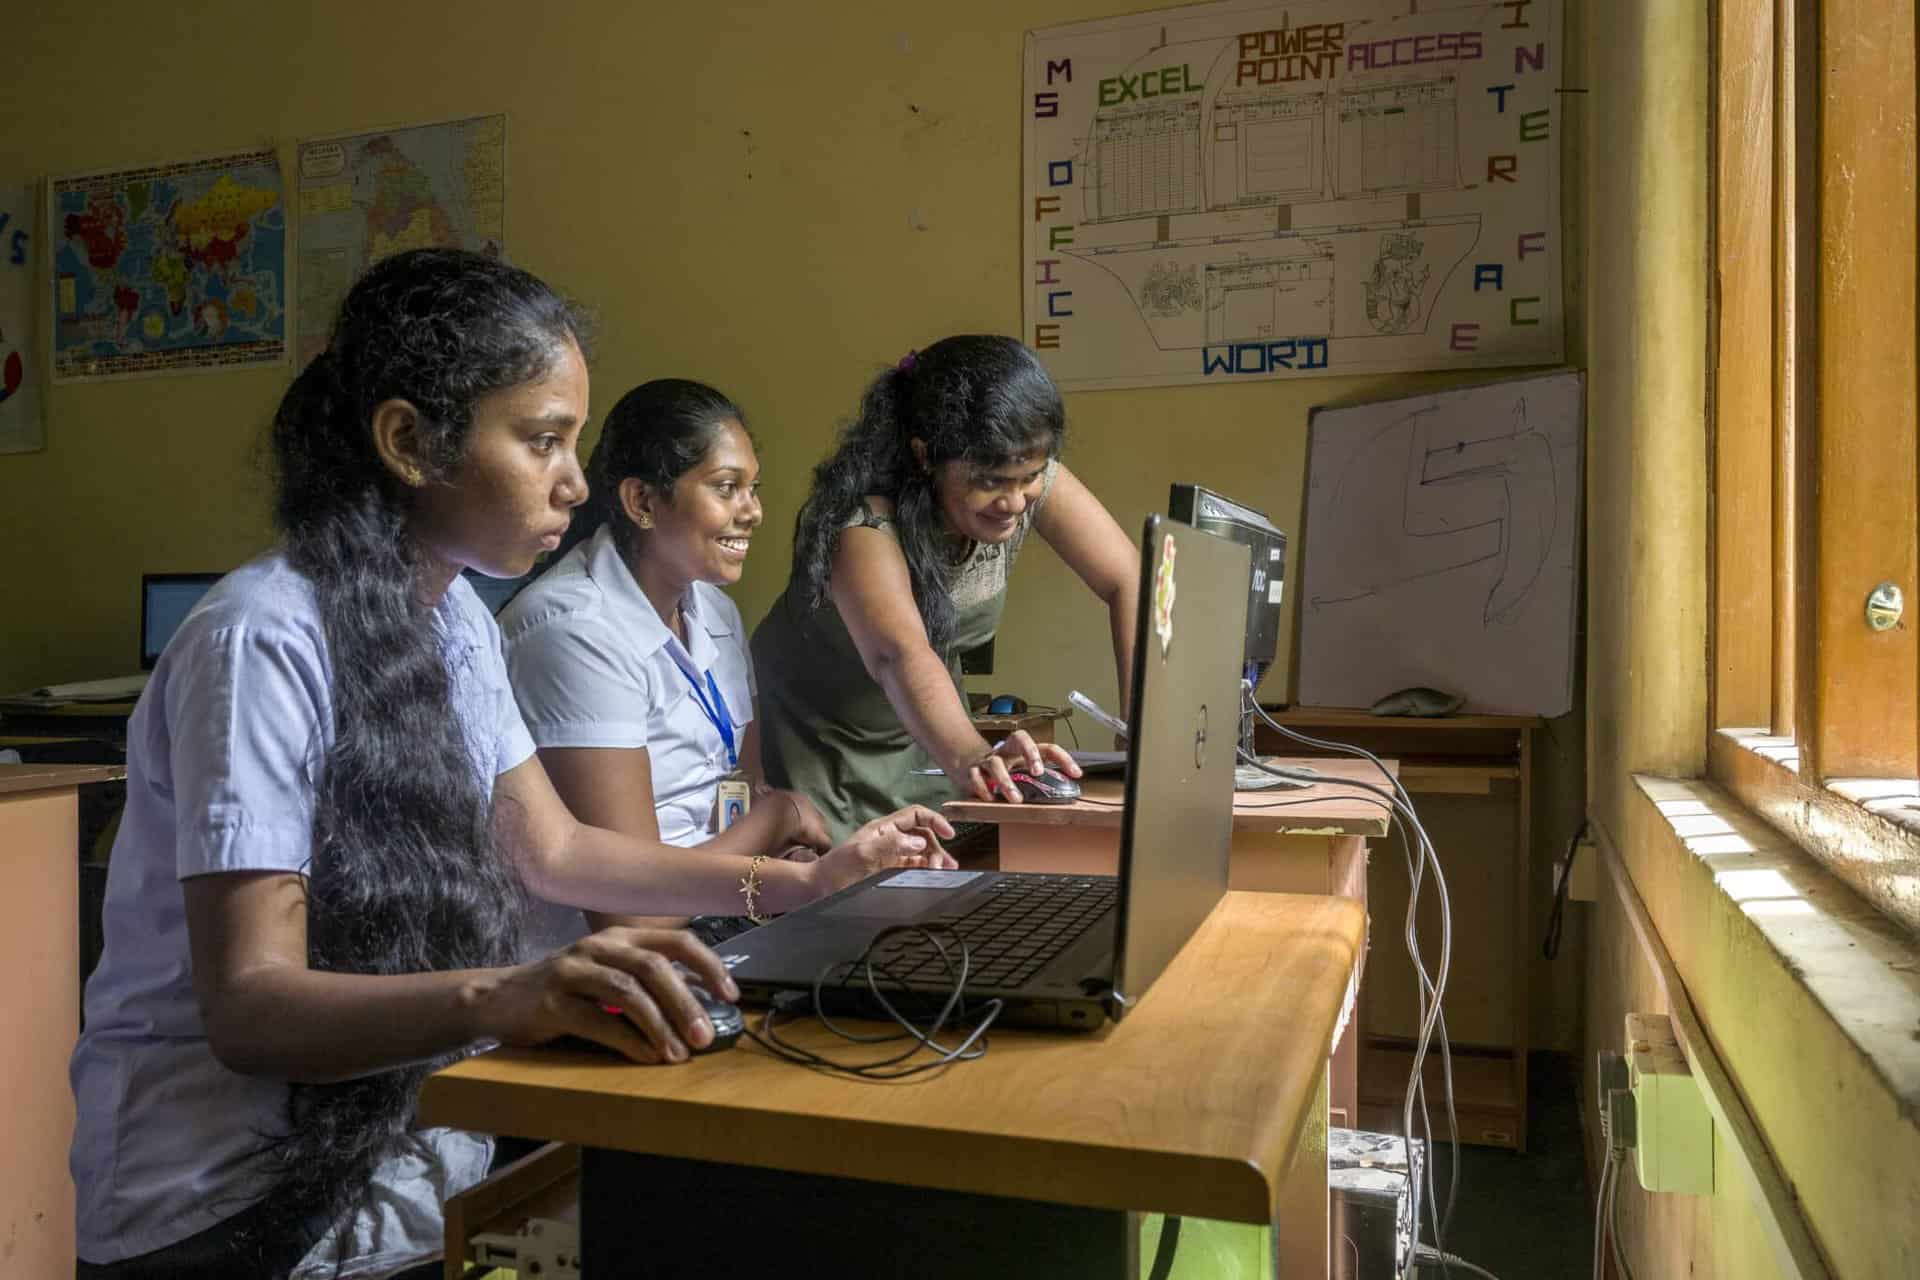 Woman in front of computers - Ilead project